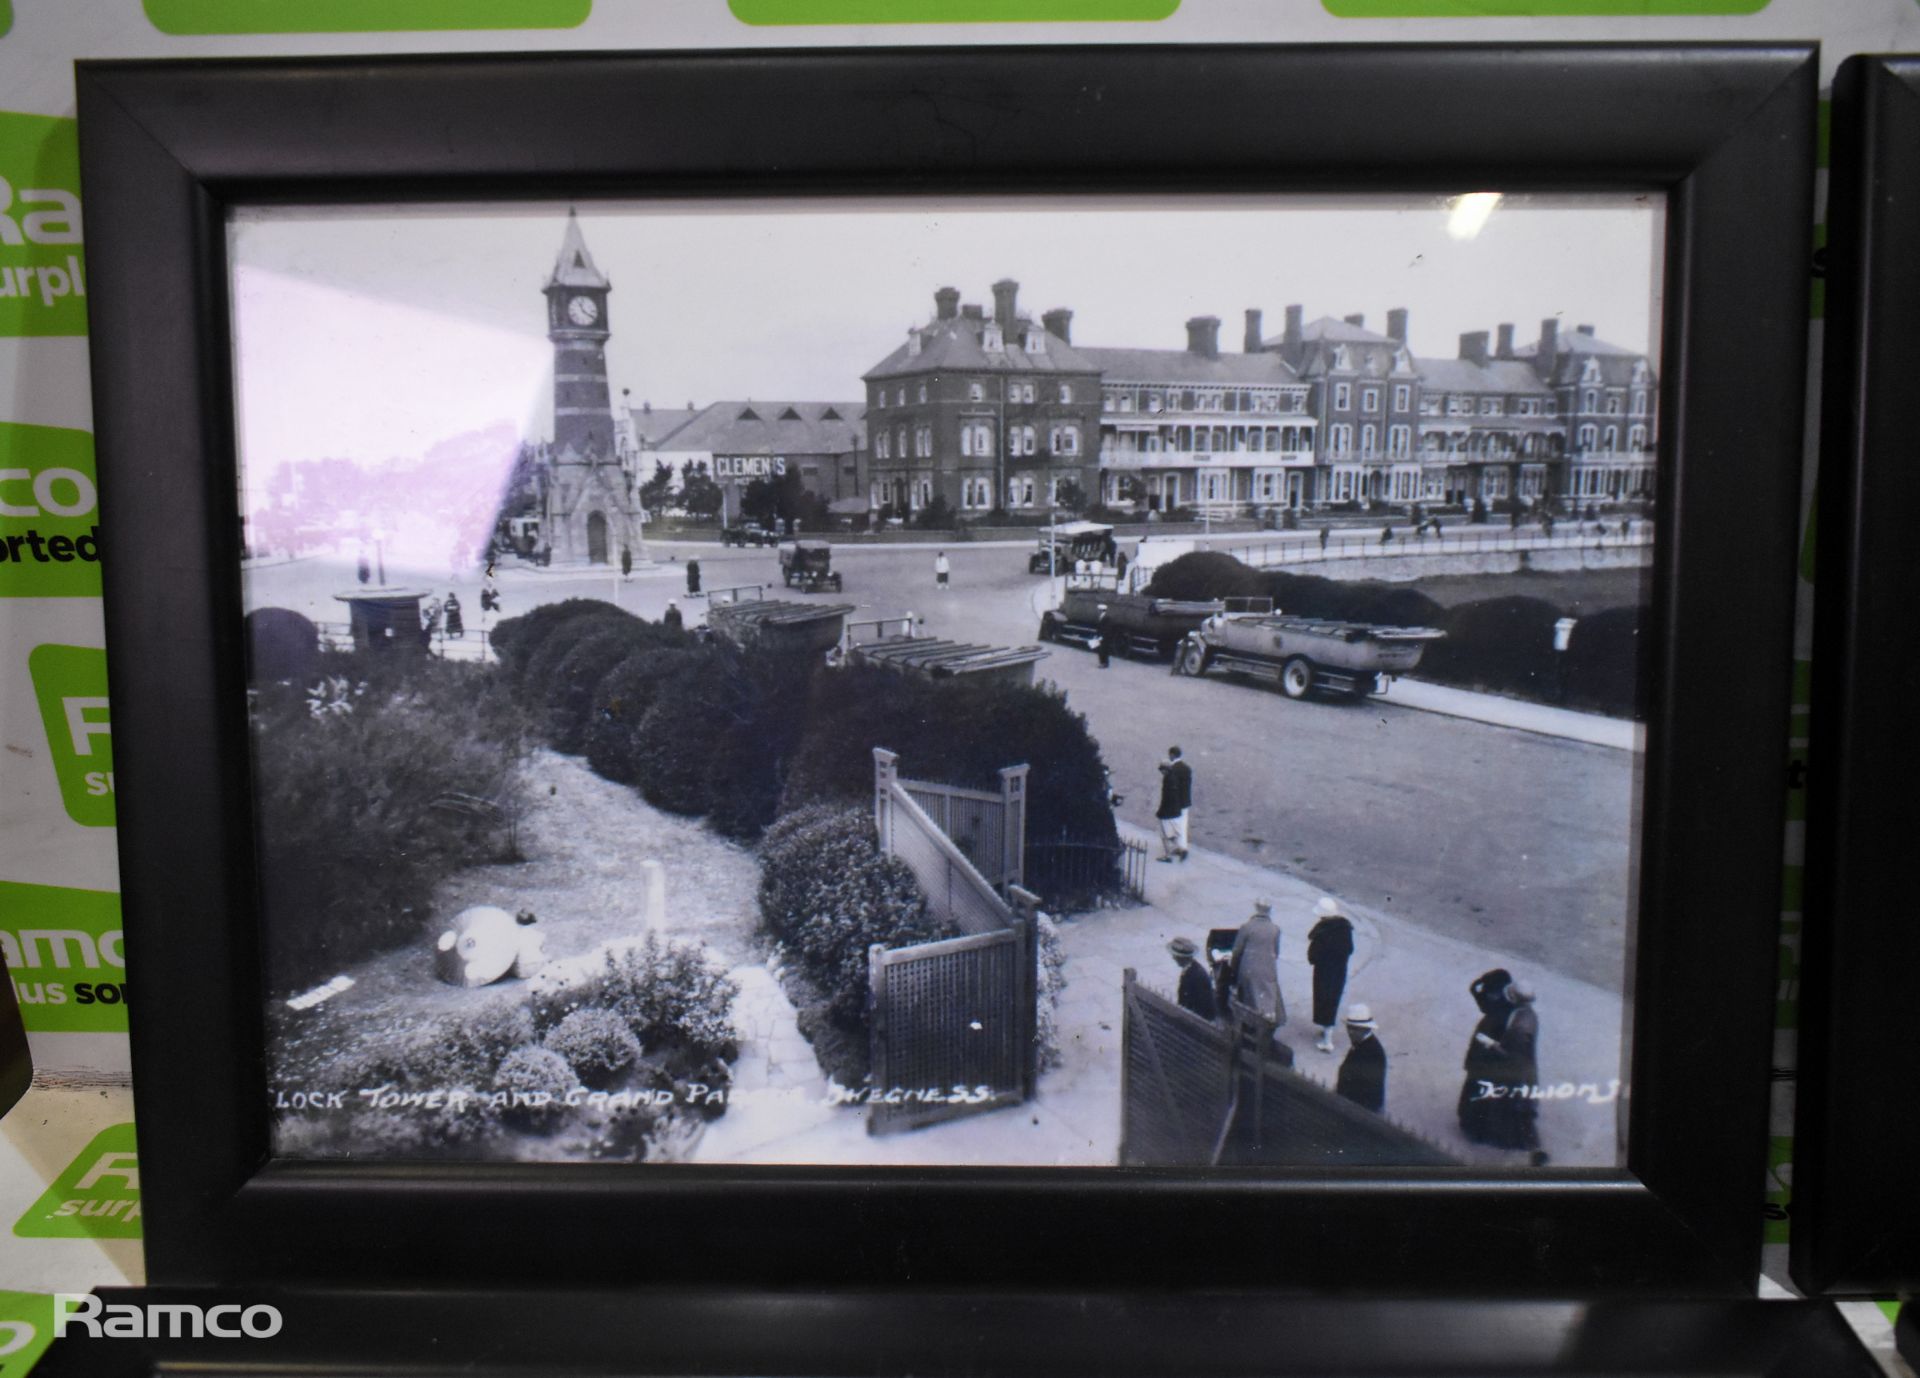 4x Skegness memorabilia photos - Clock Tower and Grande Parade - frame size: 13.5 x 10 inches - Image 2 of 5